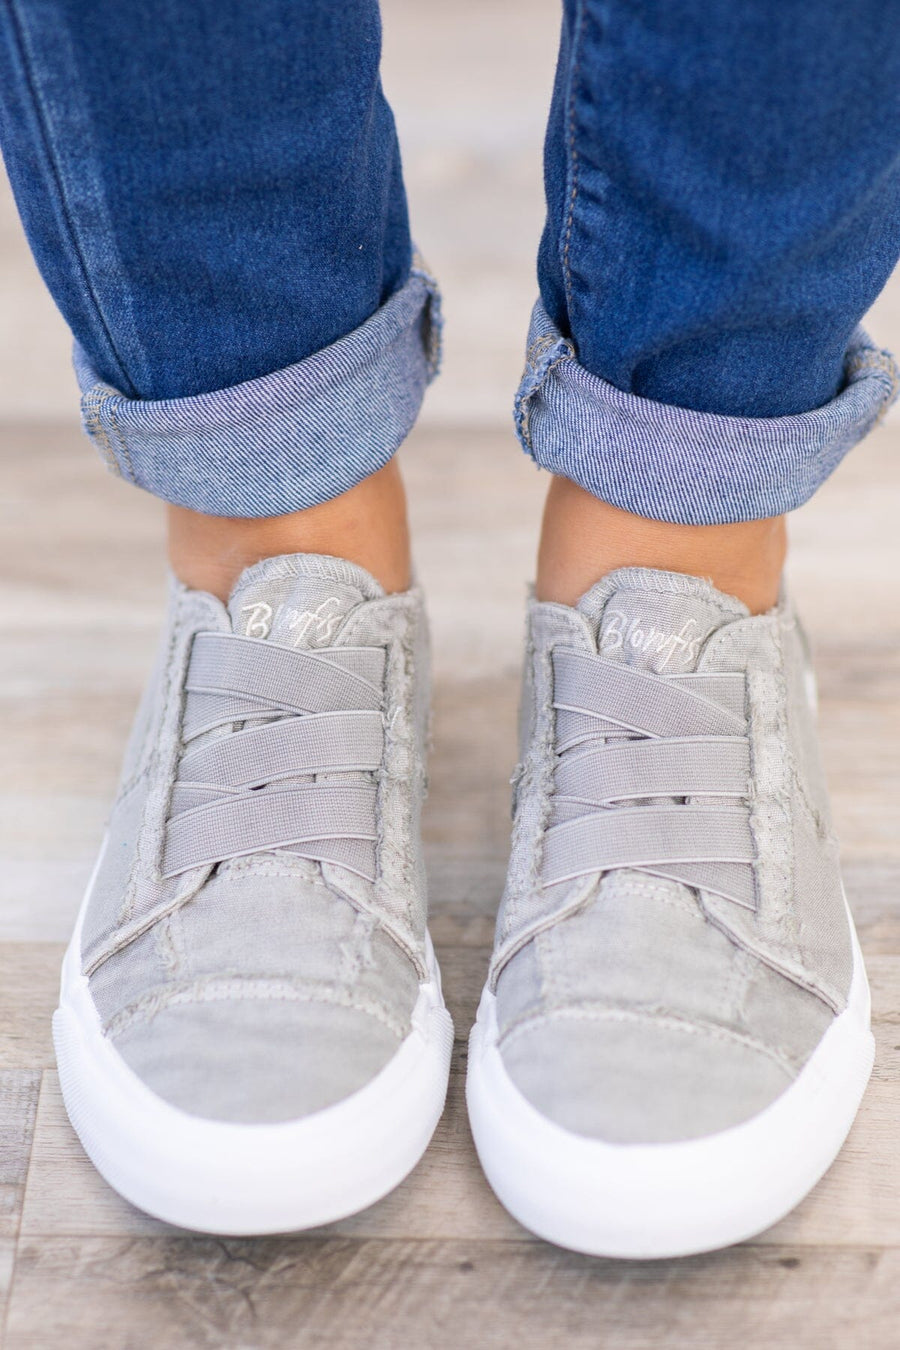 Grey and White Slip On Sneakers - Filly Flair